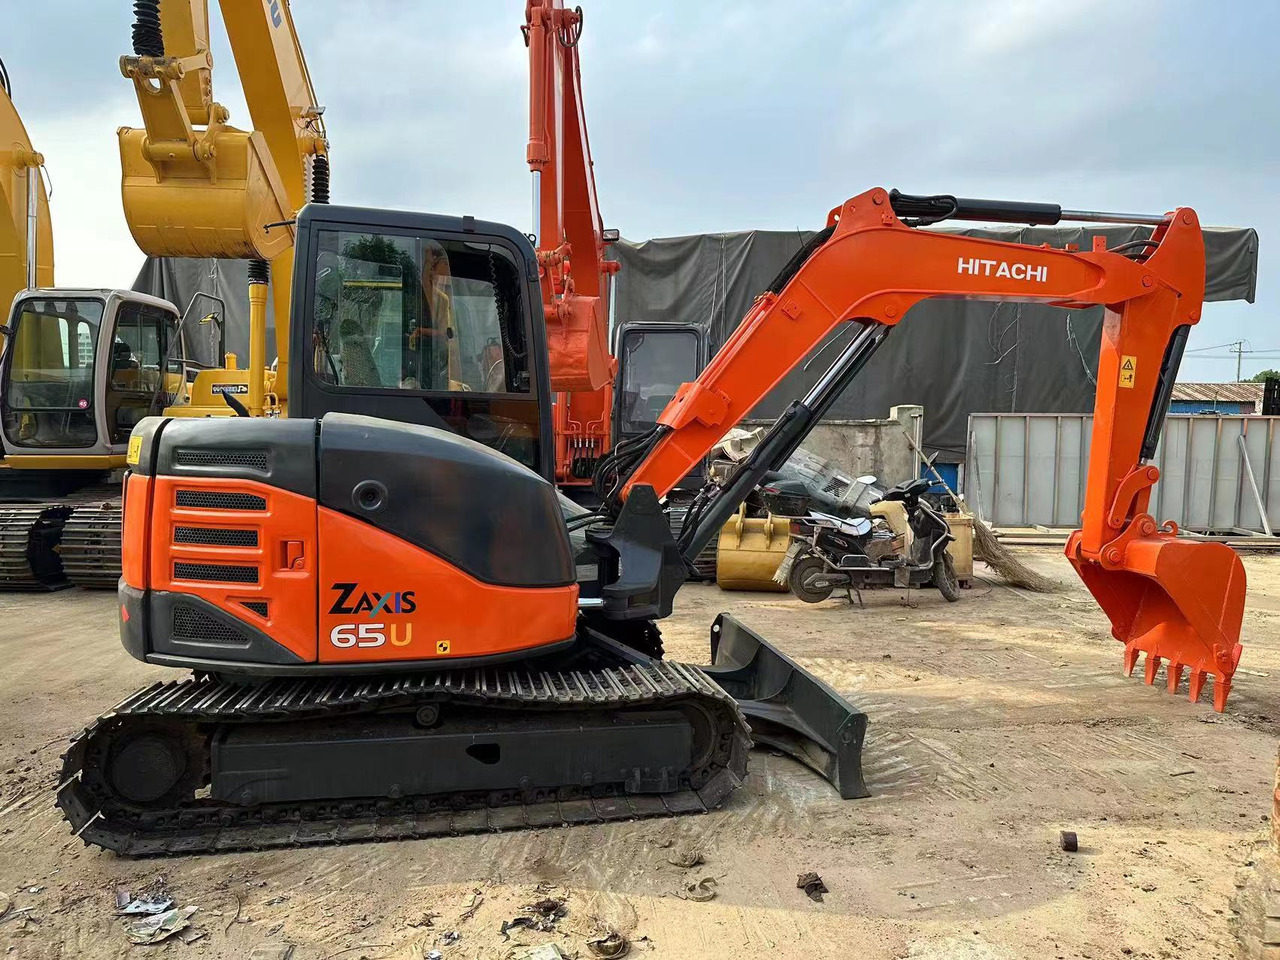 Mini pelle Good Performance Used excavator Hitachi ZX65U good condition low price on sale welcome to inquire: photos 8